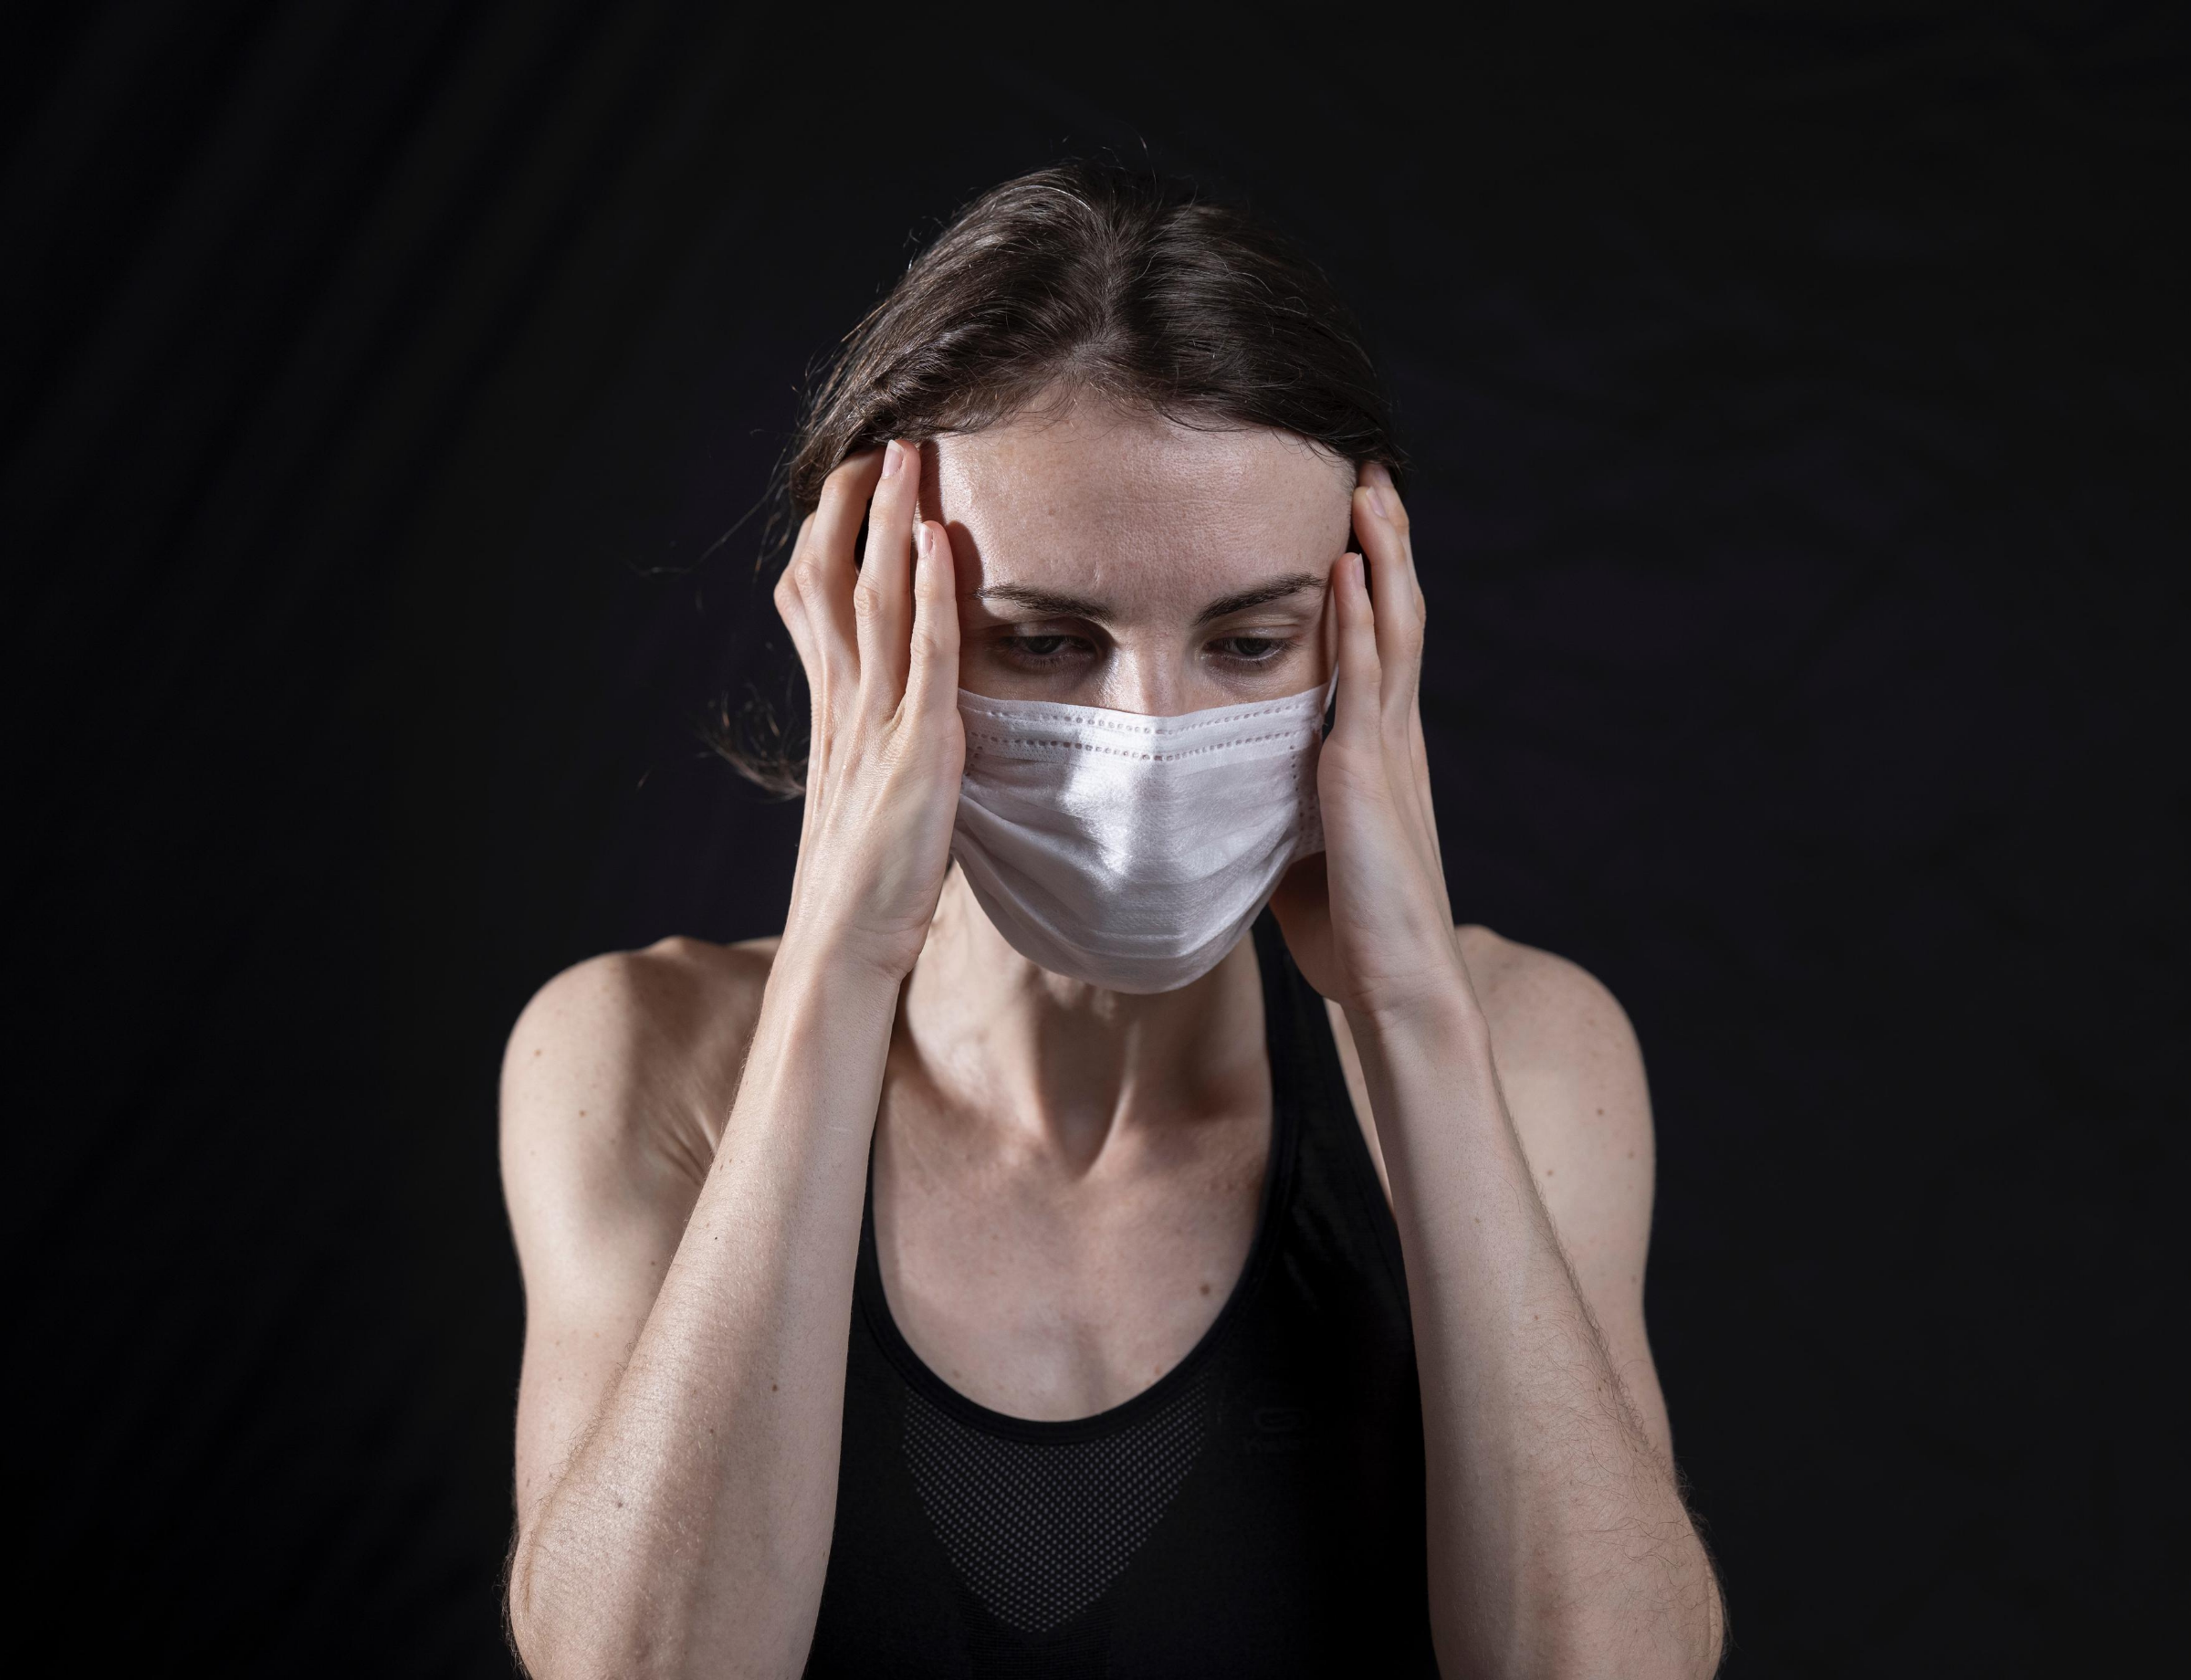 Caucasian woman in mask coping with anxiety